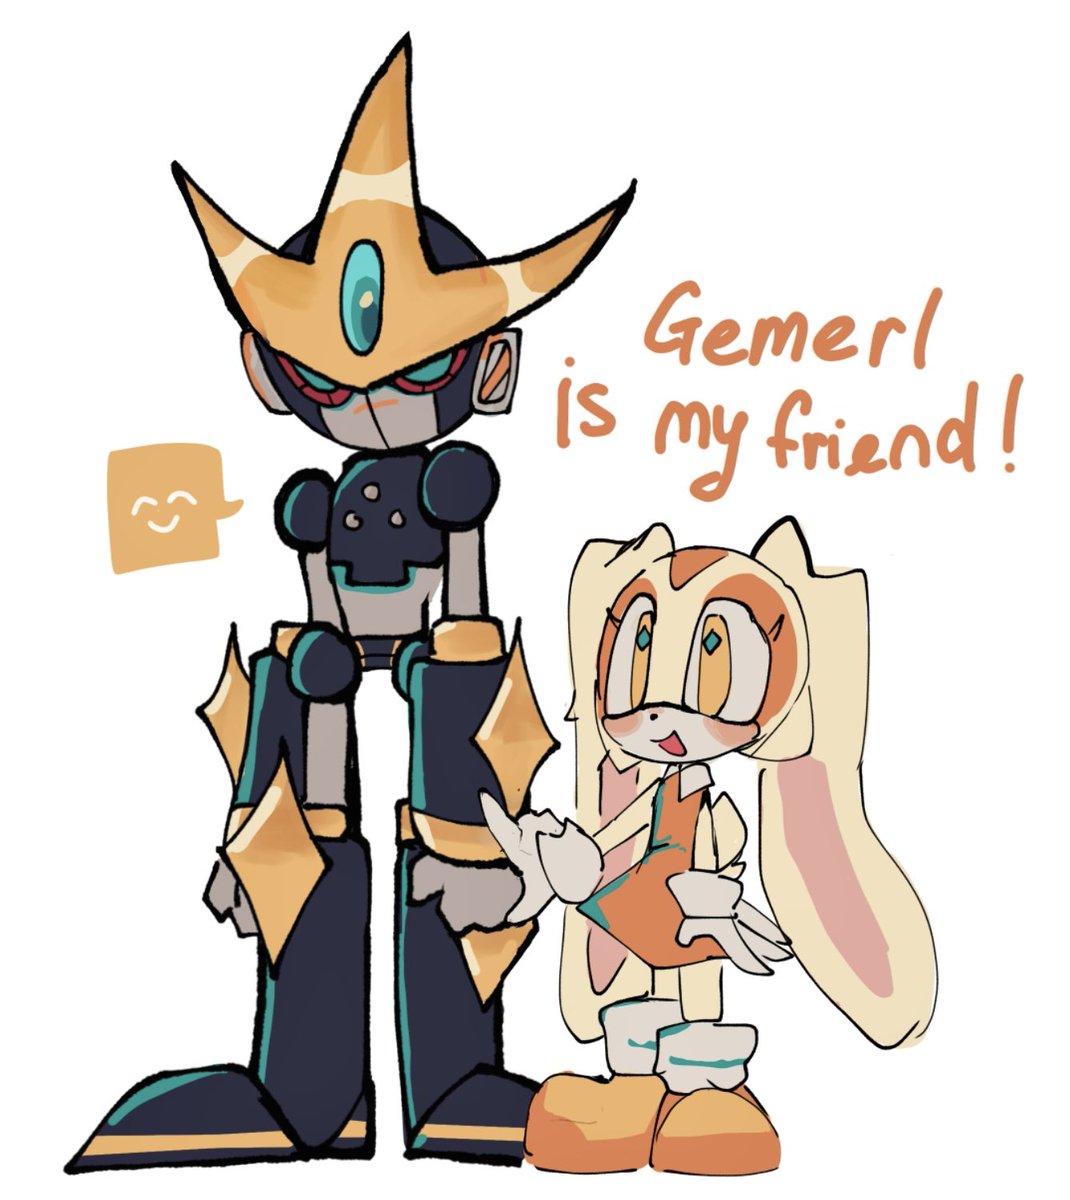 Anyone remember her robotic ahh brother figure? (Please don’t flop) 
#SonicTheHedgehod #Gemerl #CreamTheRabbit